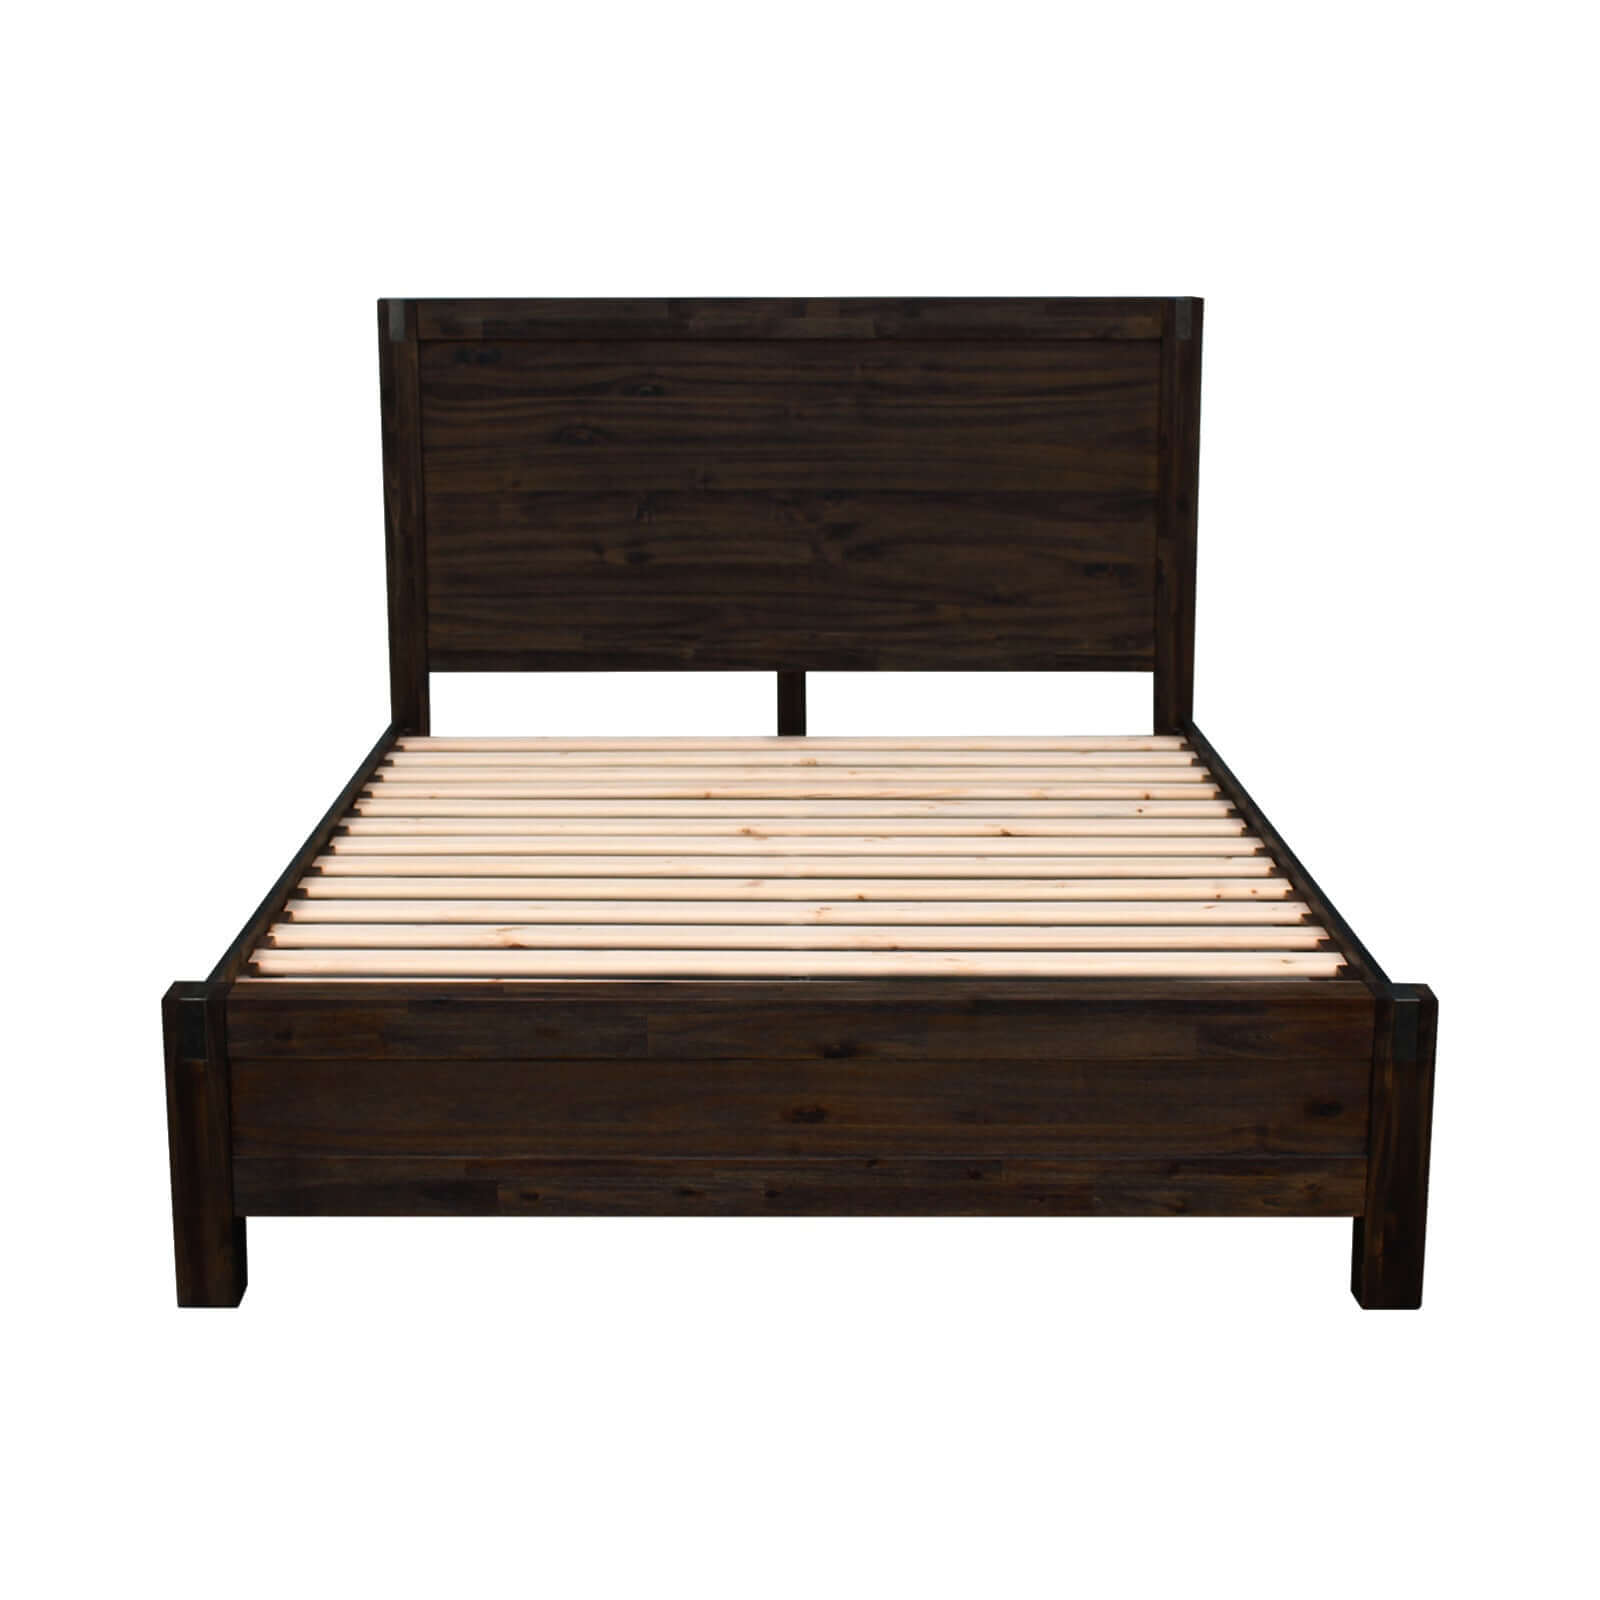 Buy 5 pieces bedroom suite in solid wood veneered acacia construction timber slat king size chocolate colour bed bedside - upinteriors-Upinteriors